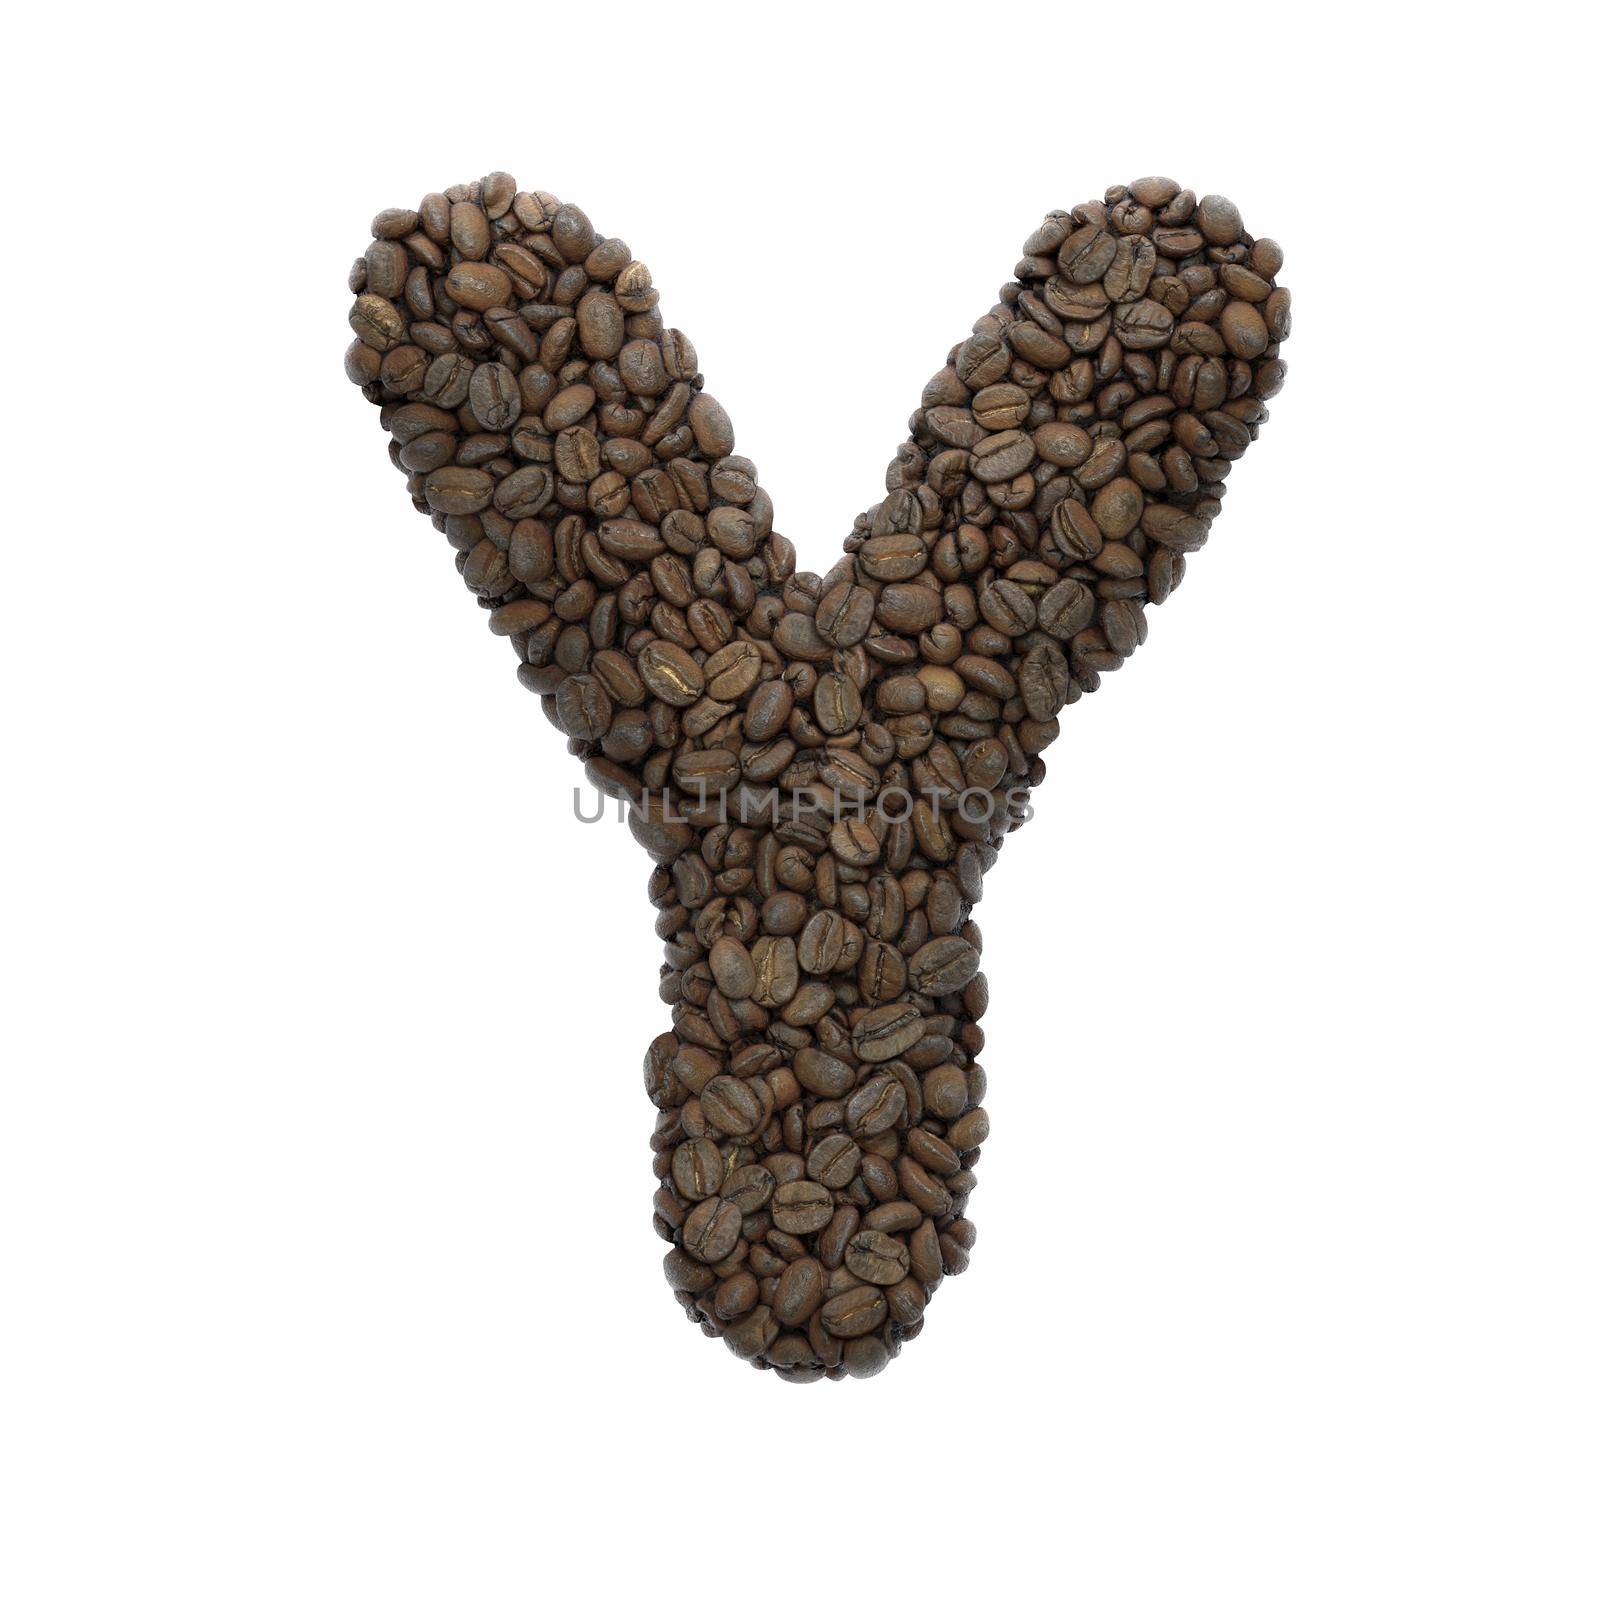 Coffee letter Y - Capital 3d roasted beans font - suitable for Coffee, energy or insomnia related subjects by chrisroll